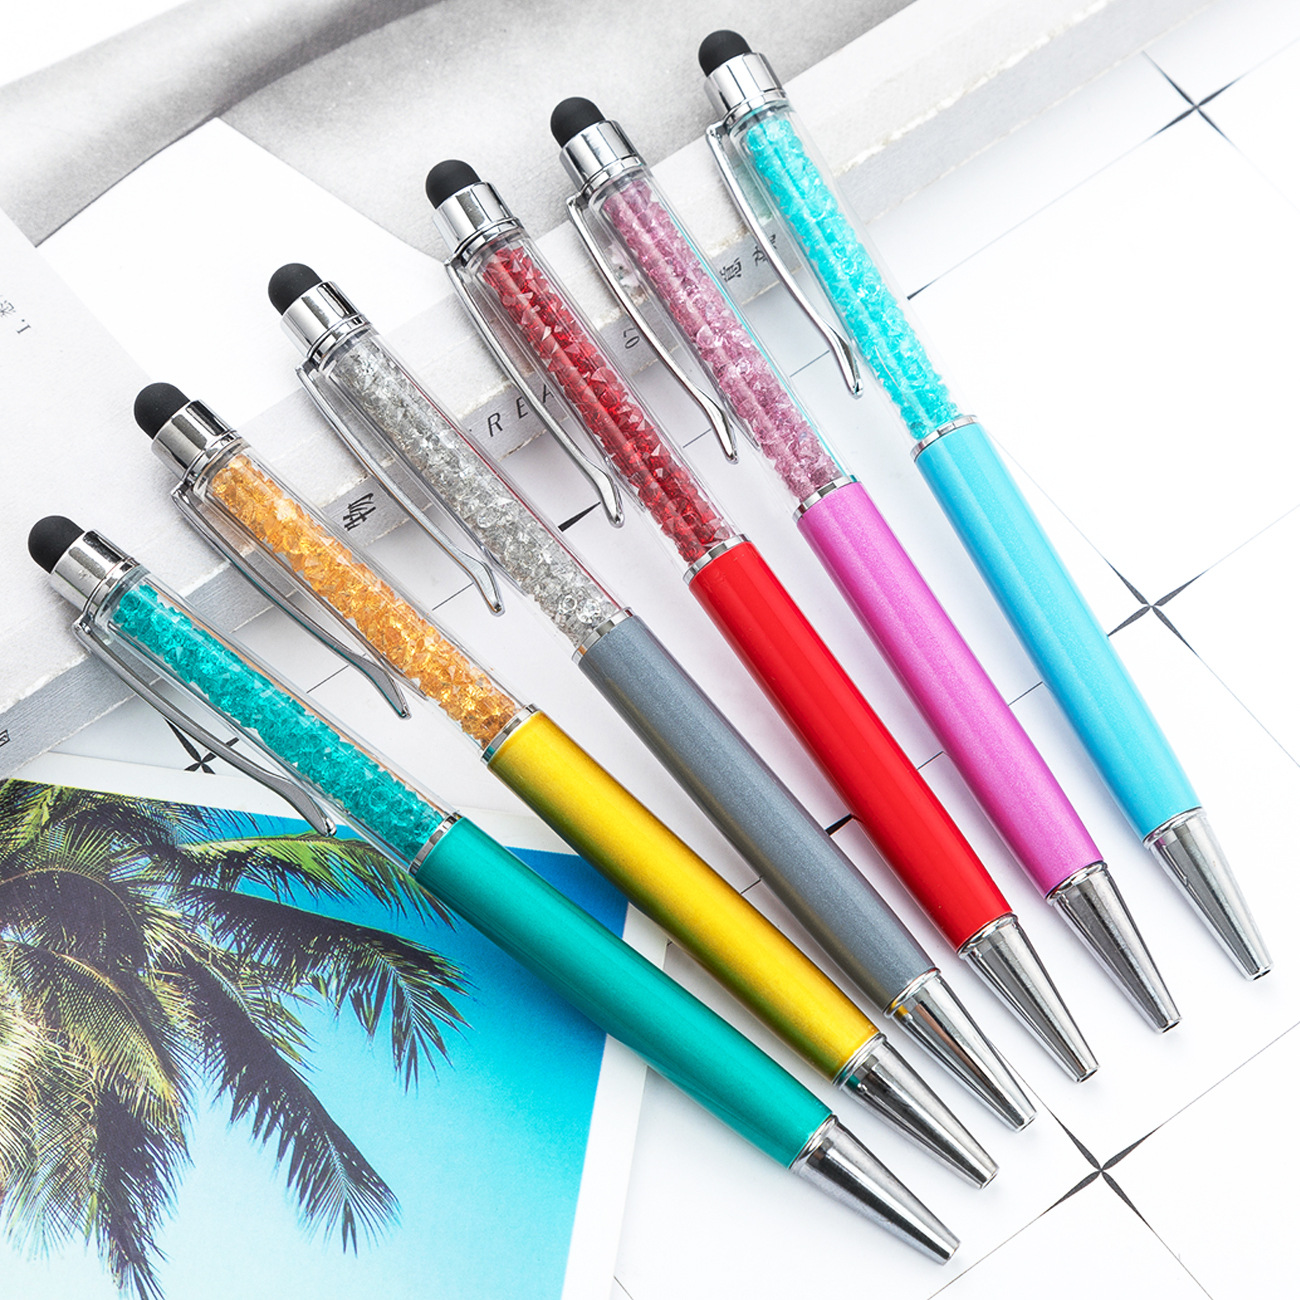 Crystal Diamond Capacitive Ballpoint Pens Universal Touch Screen Stylus Pen Retractable 2 in-1 Pens Black Ink for School Students Cell Phone